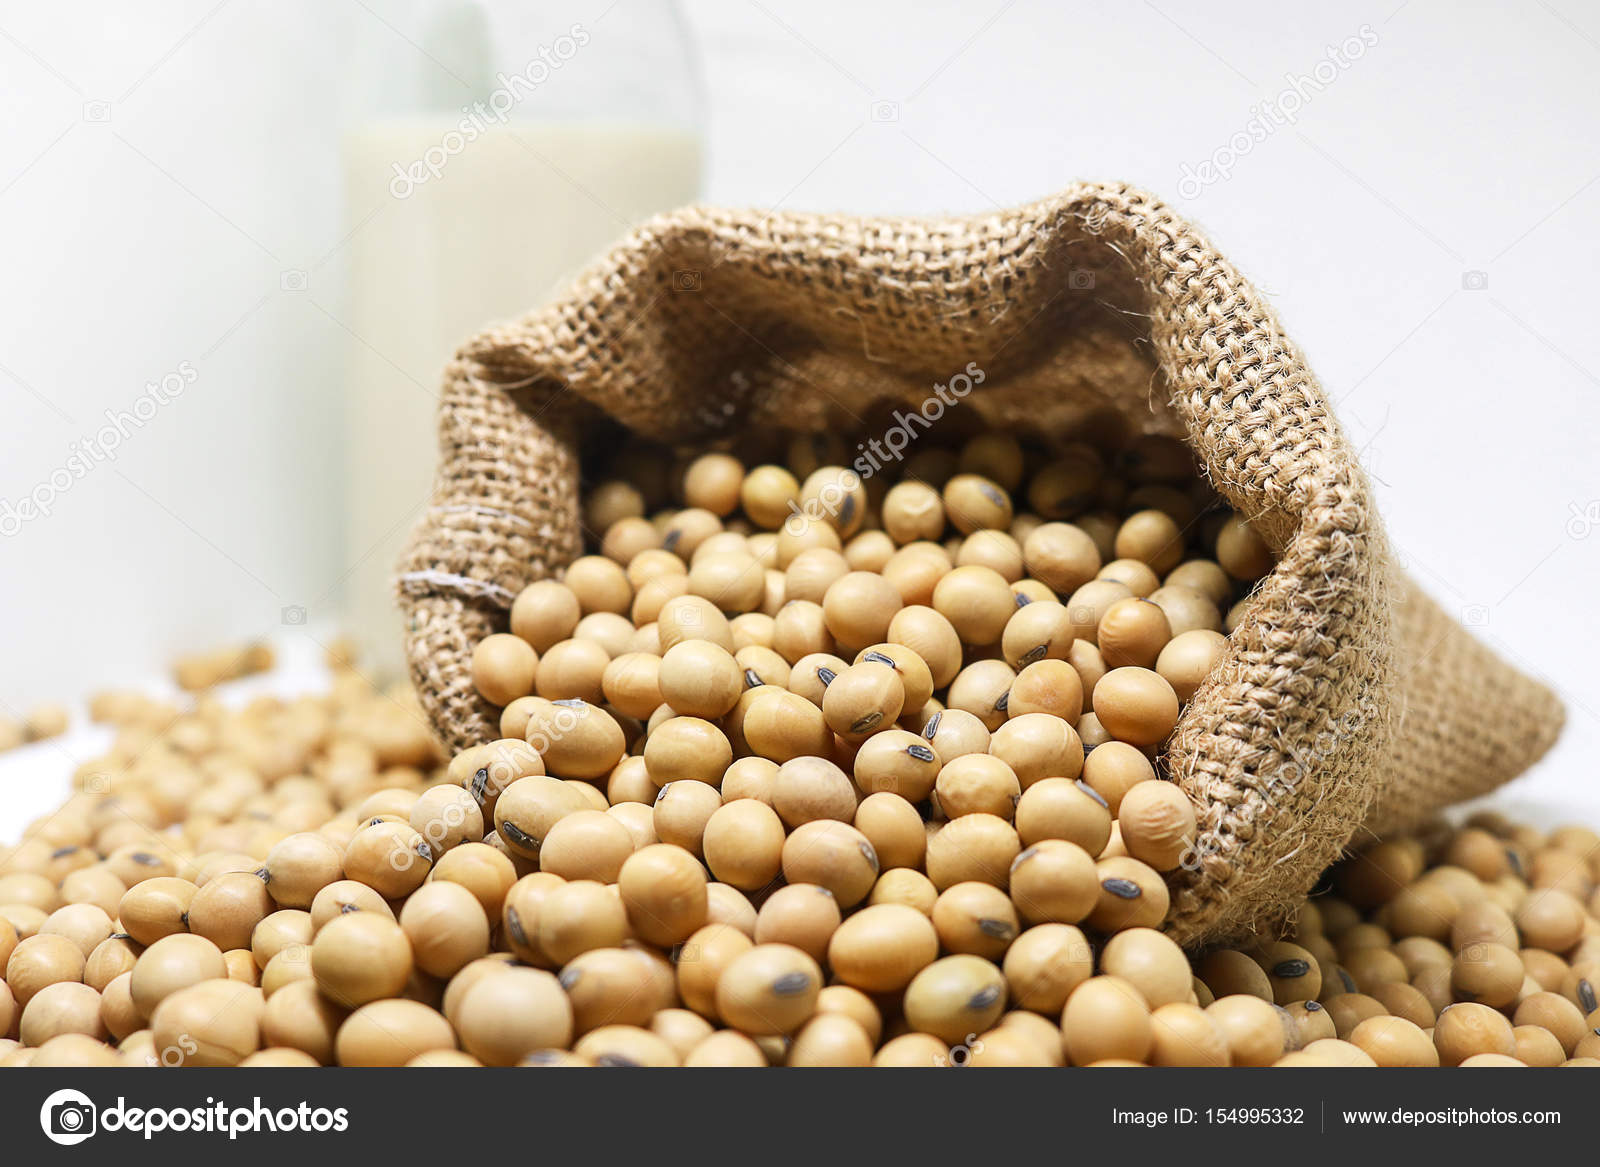 Raw Dried Soybean Or Soya Bean In Wooden Bowl And Sack Bag. Stock Photo,  Picture and Royalty Free Image. Image 130027394.